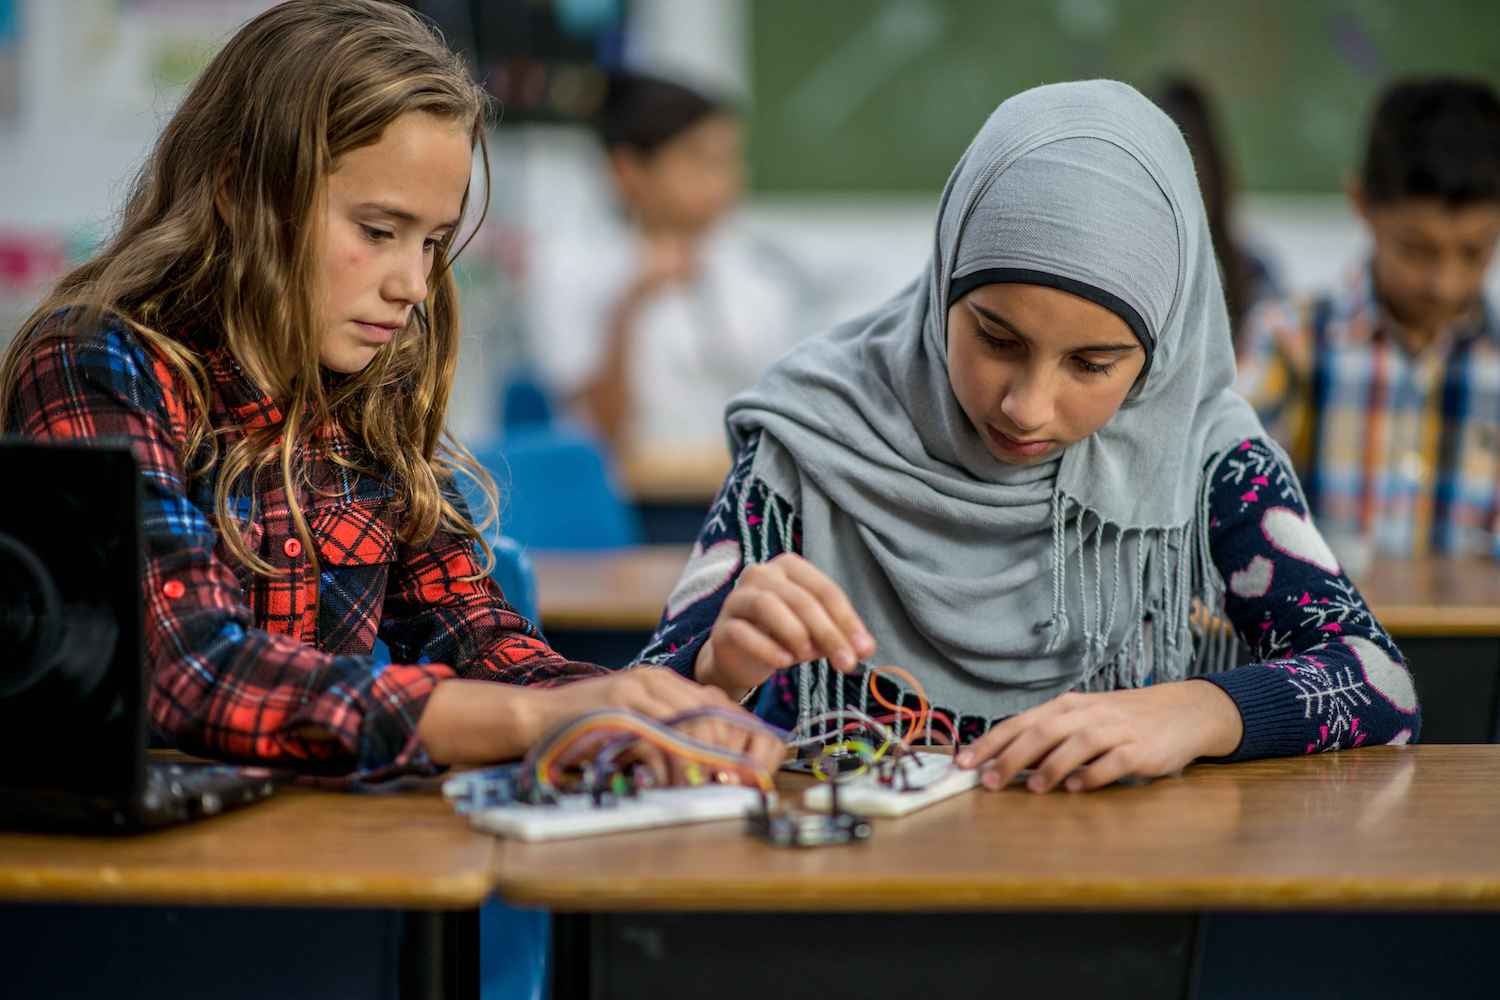 Image of two children working on an electrical project in a school setting